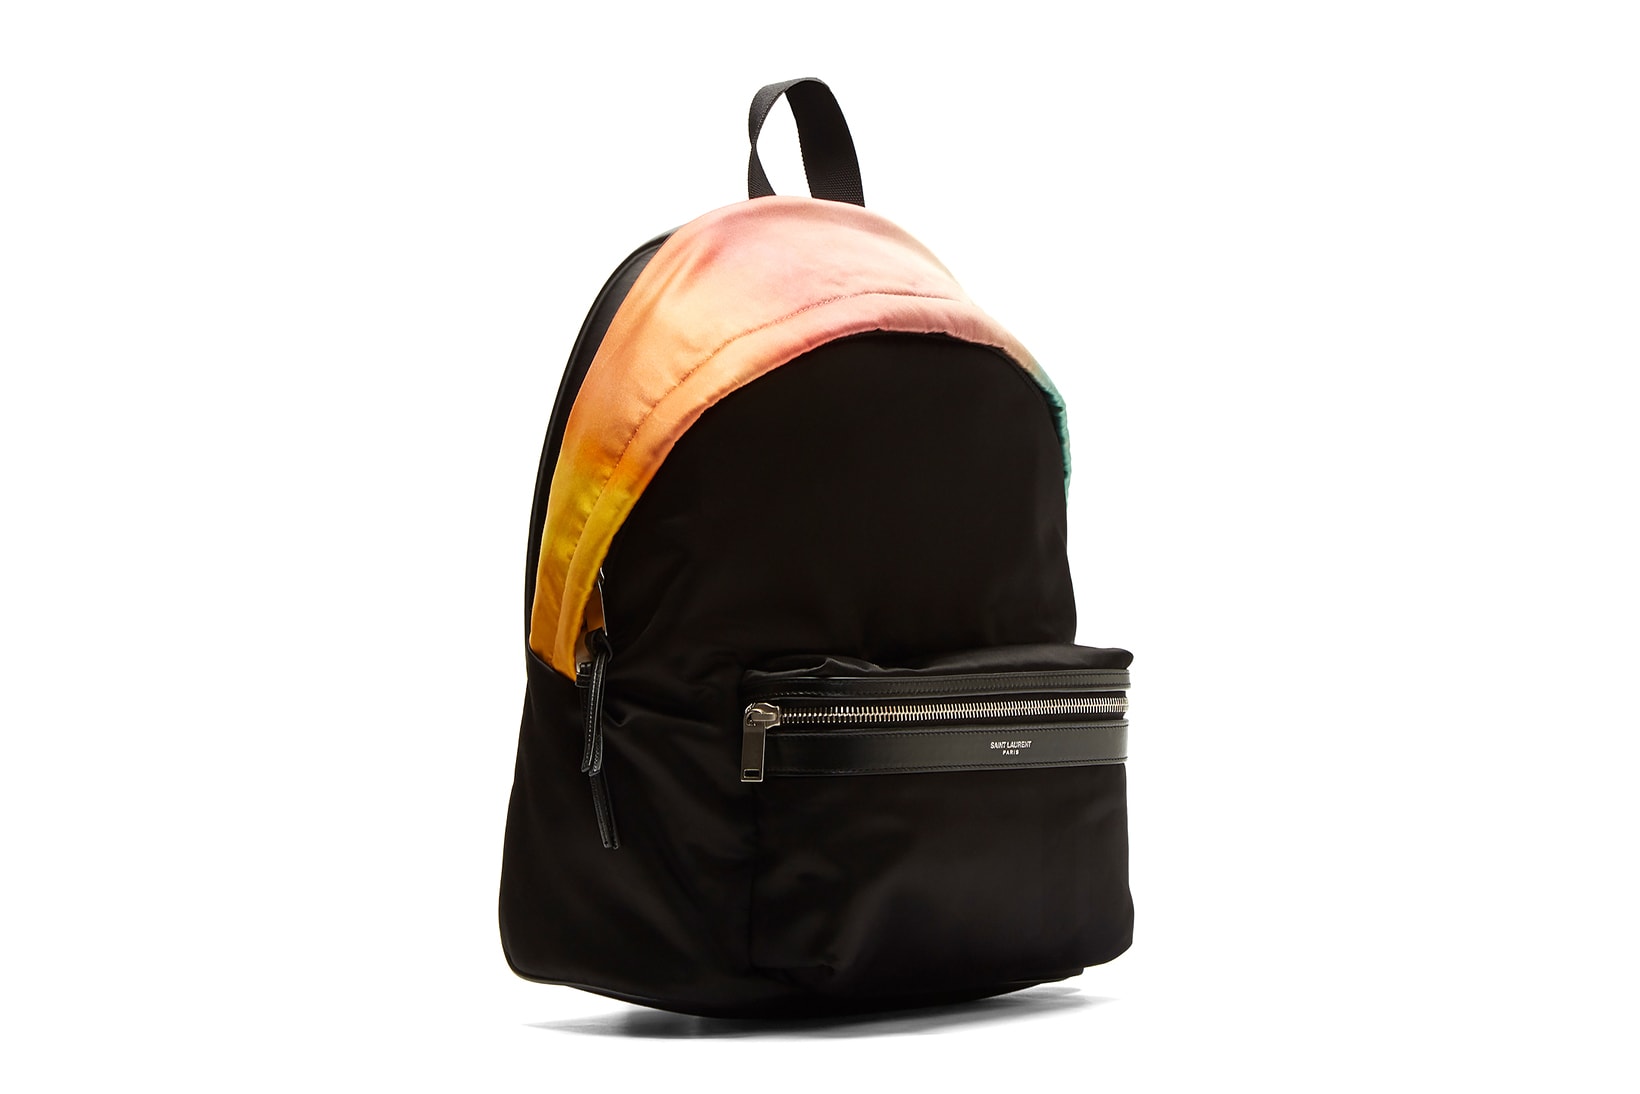 Saint Laurent City Multi-pocket Backpack In Smooth Leather And Nylon in  Black for Men